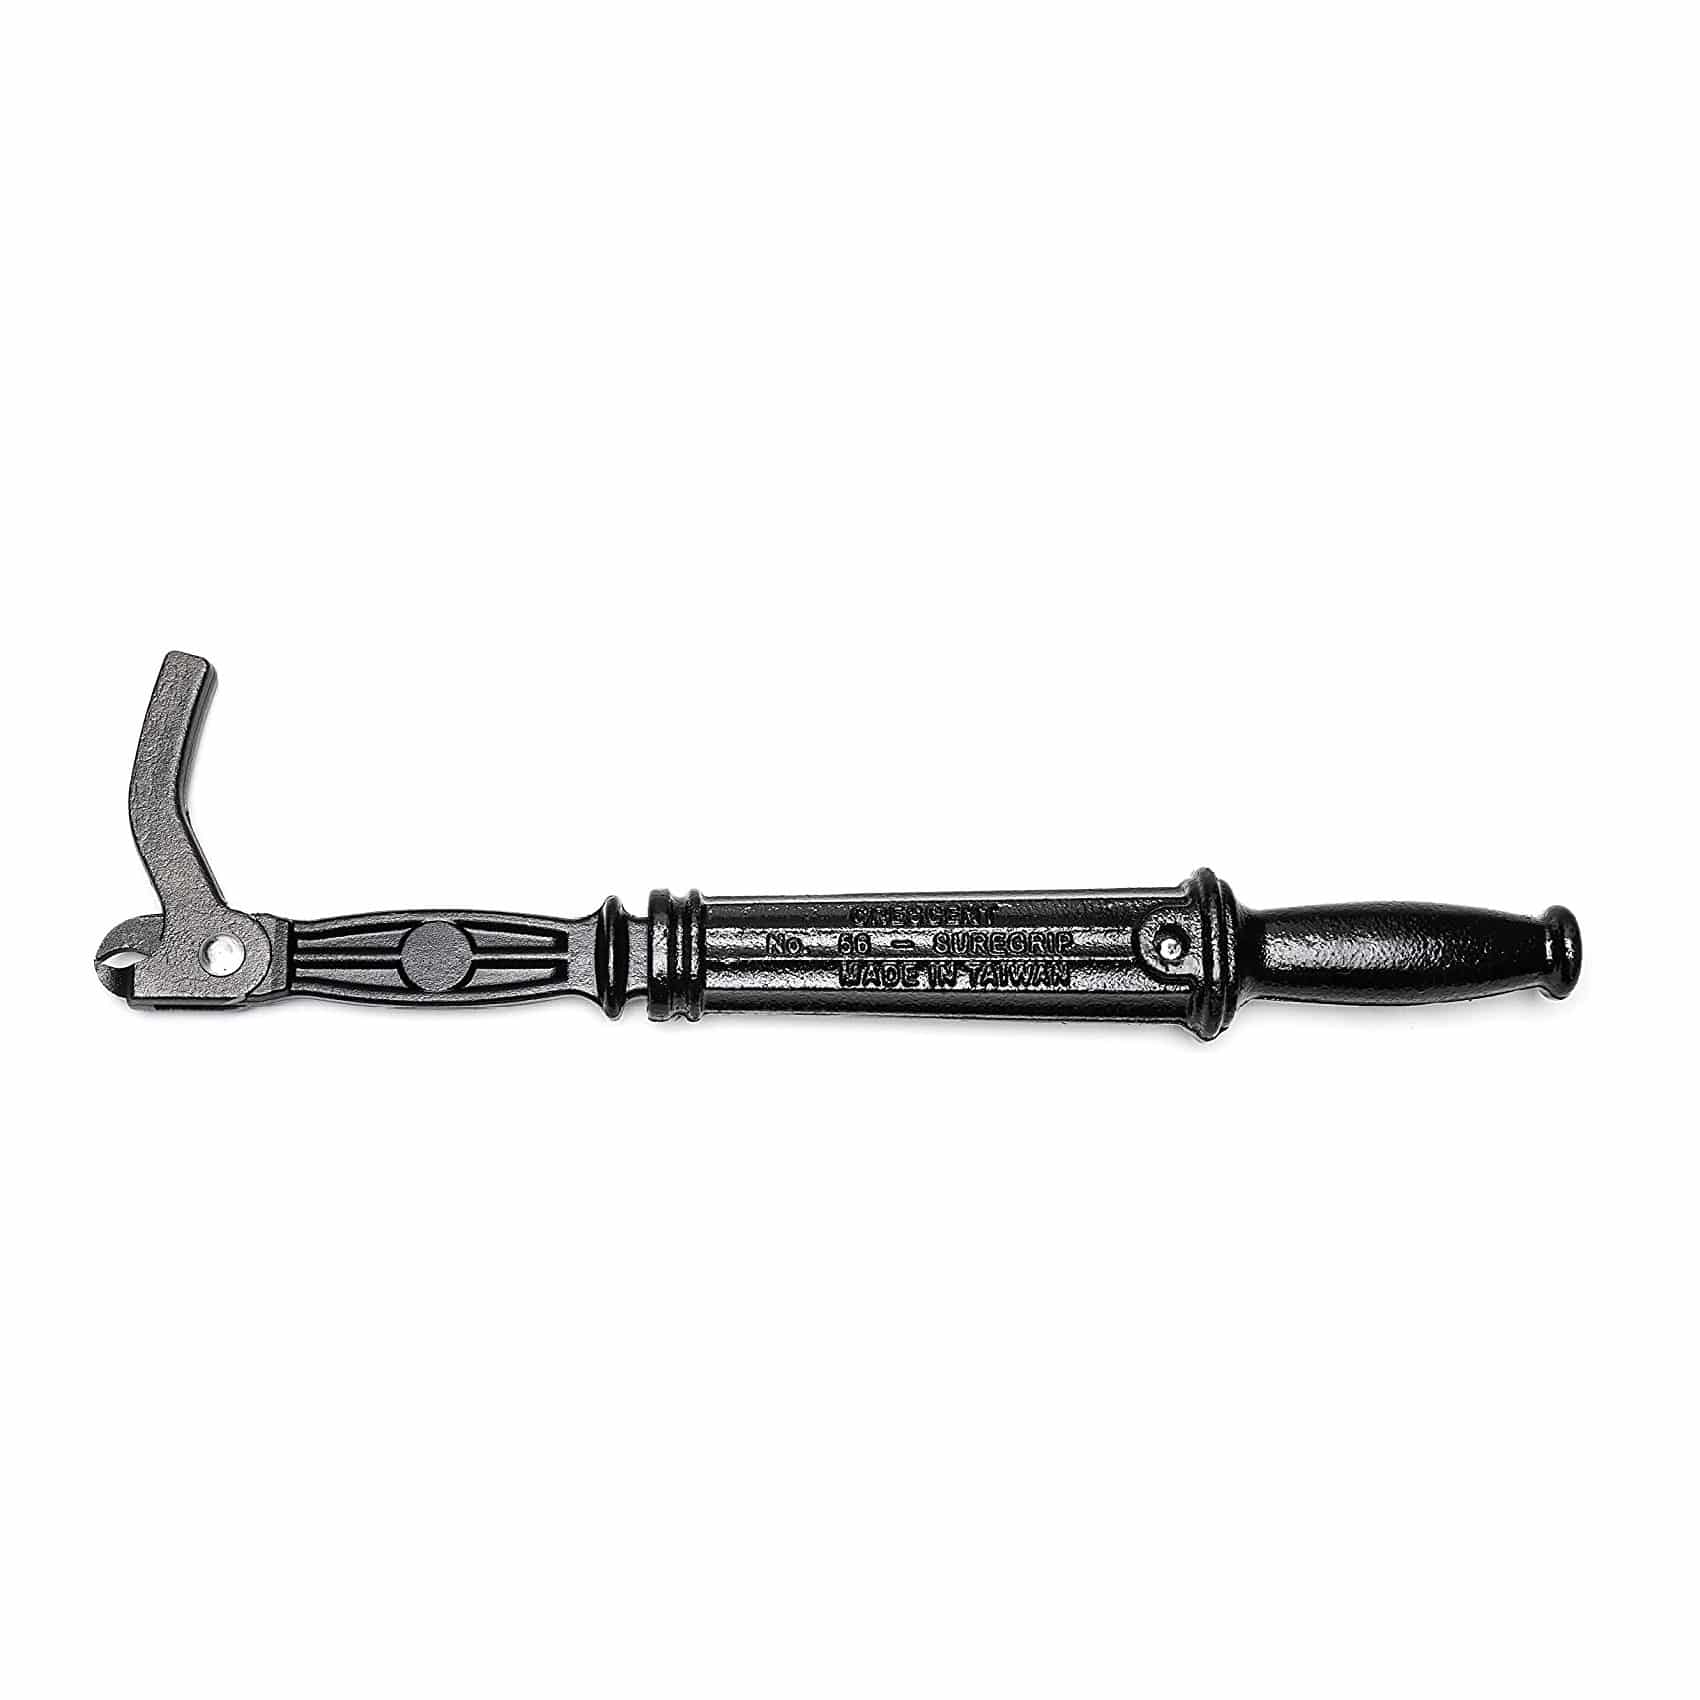 Crescent 56 Nail Puller - 10 Best Nail Pullers - Comprehensive Reviews and Buyer's Guide - HandyMan.Guide - Nail Puller